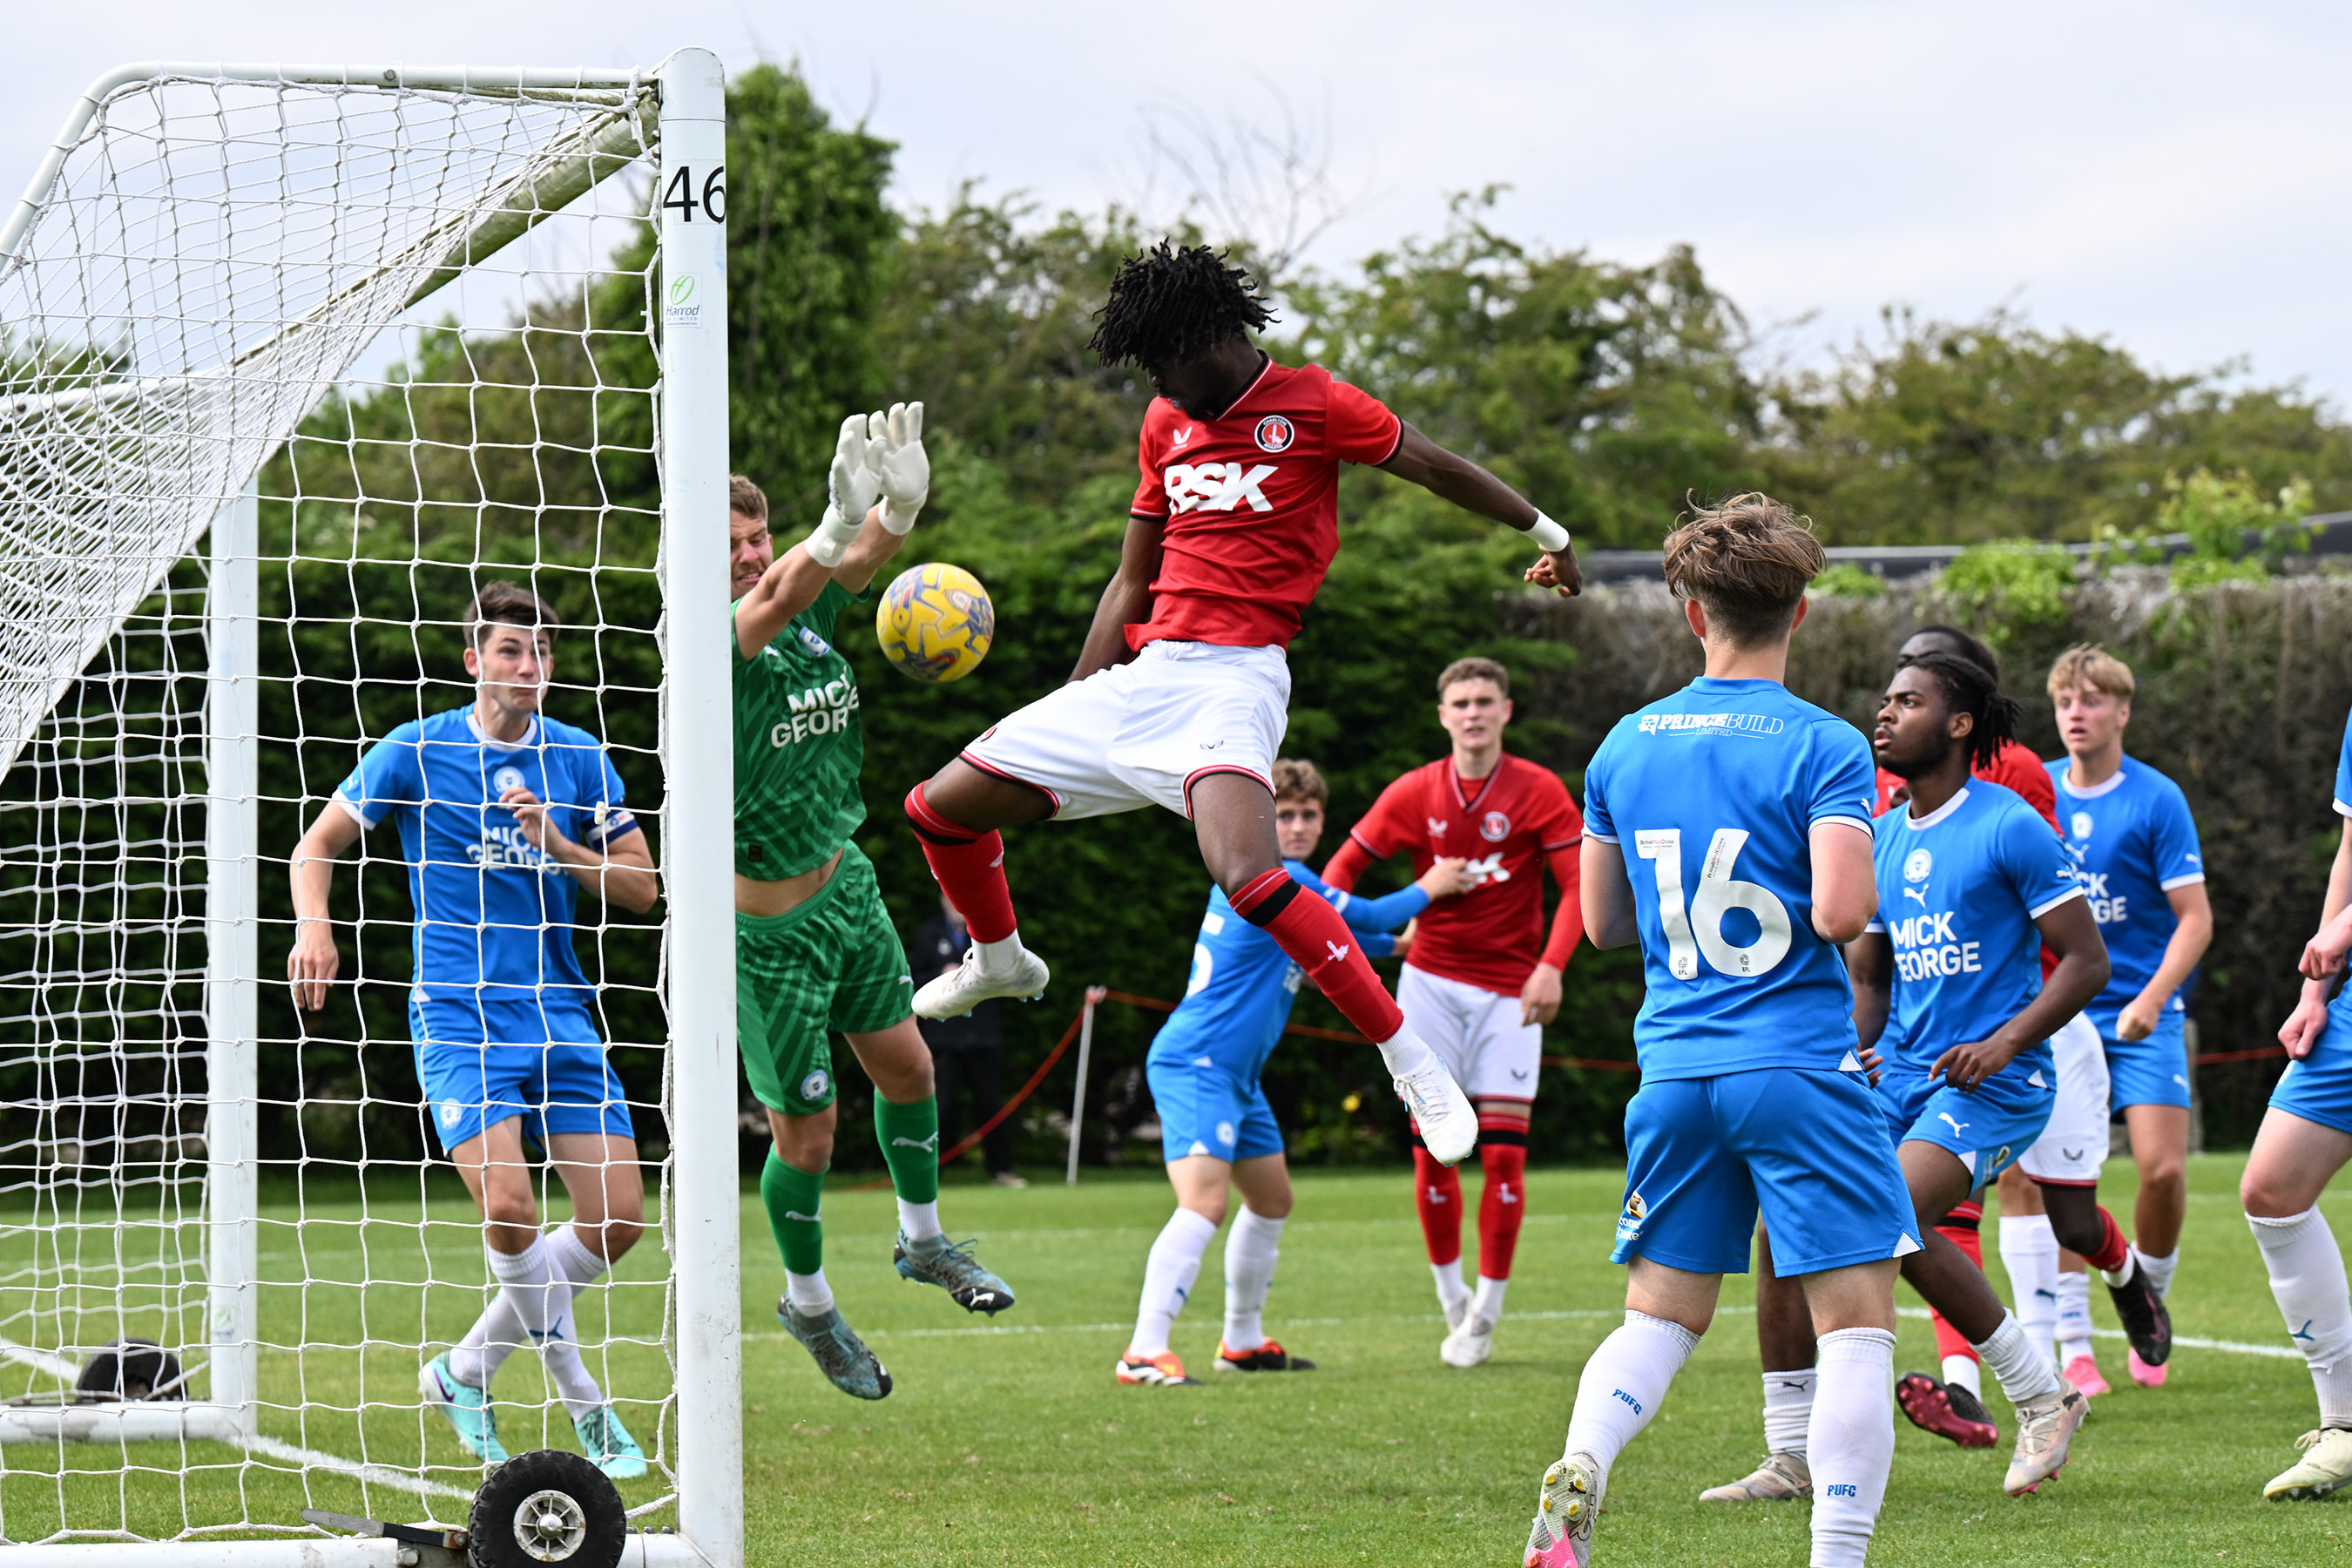 Tolu Ladapo jumps with Jake West as the ball goes into the net.